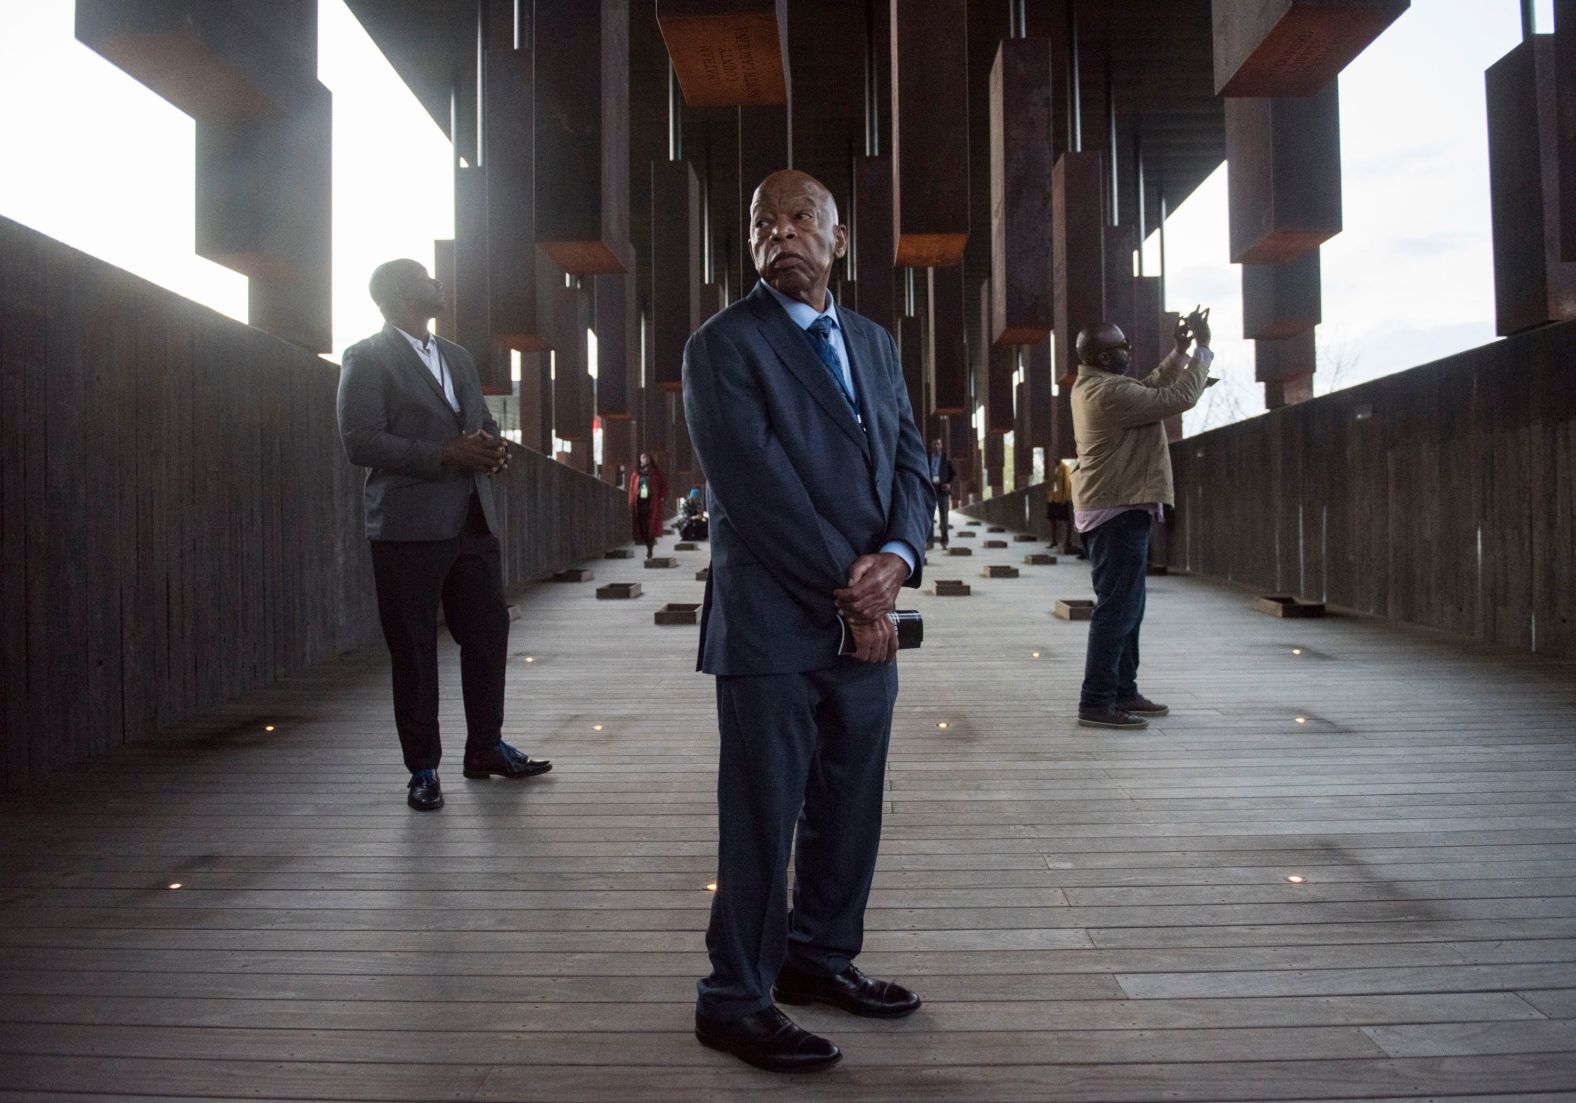 In March 2019, Lewis walks through monuments honoring the victims of racial lynchings at the National Memorial for Peace and Justice in Montgomery, Alabama.